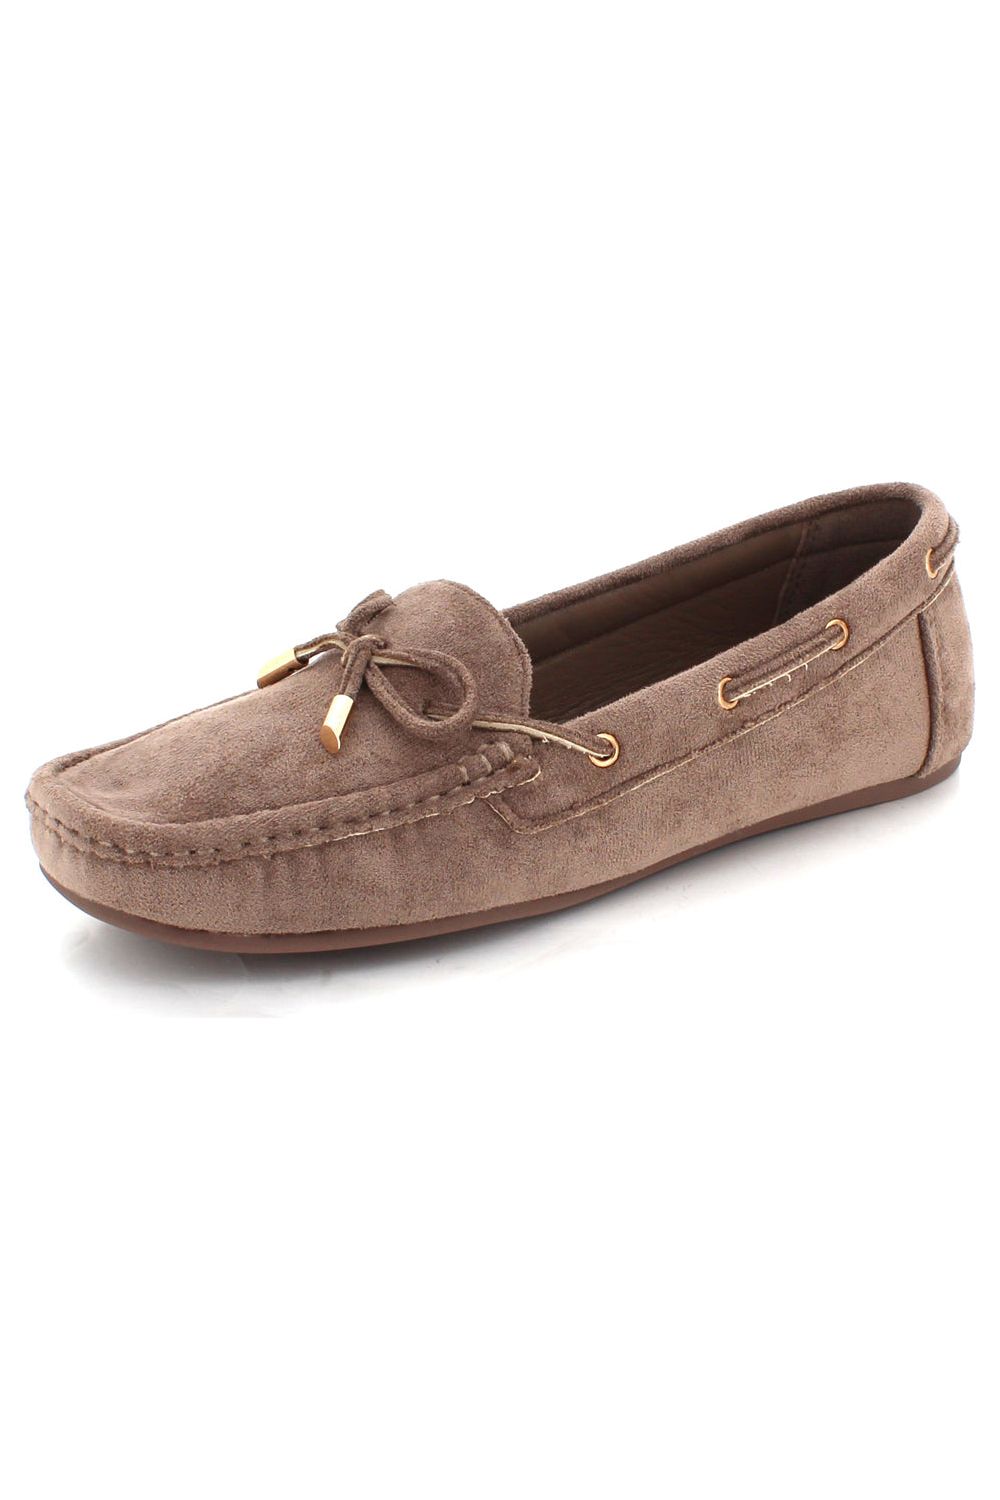 Comfort Casual Office Work Lightweight Mocassins Loafer Closed Toe Flat L8029